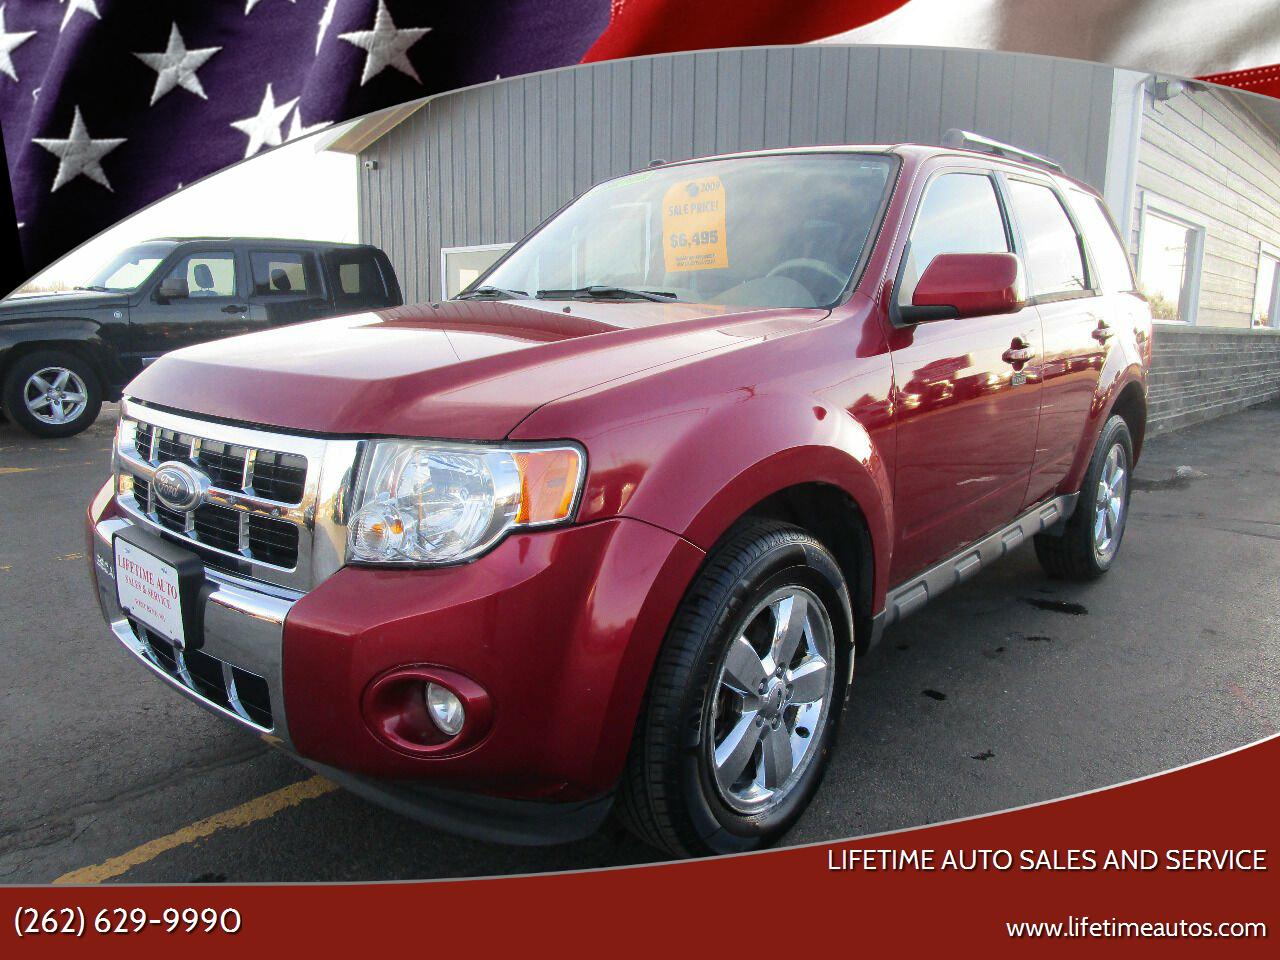 Used 2009 Ford Escape Limited V6 AWD for Sale Right Now - CarGurus 2009 Ford Escape Towing Capacity V6